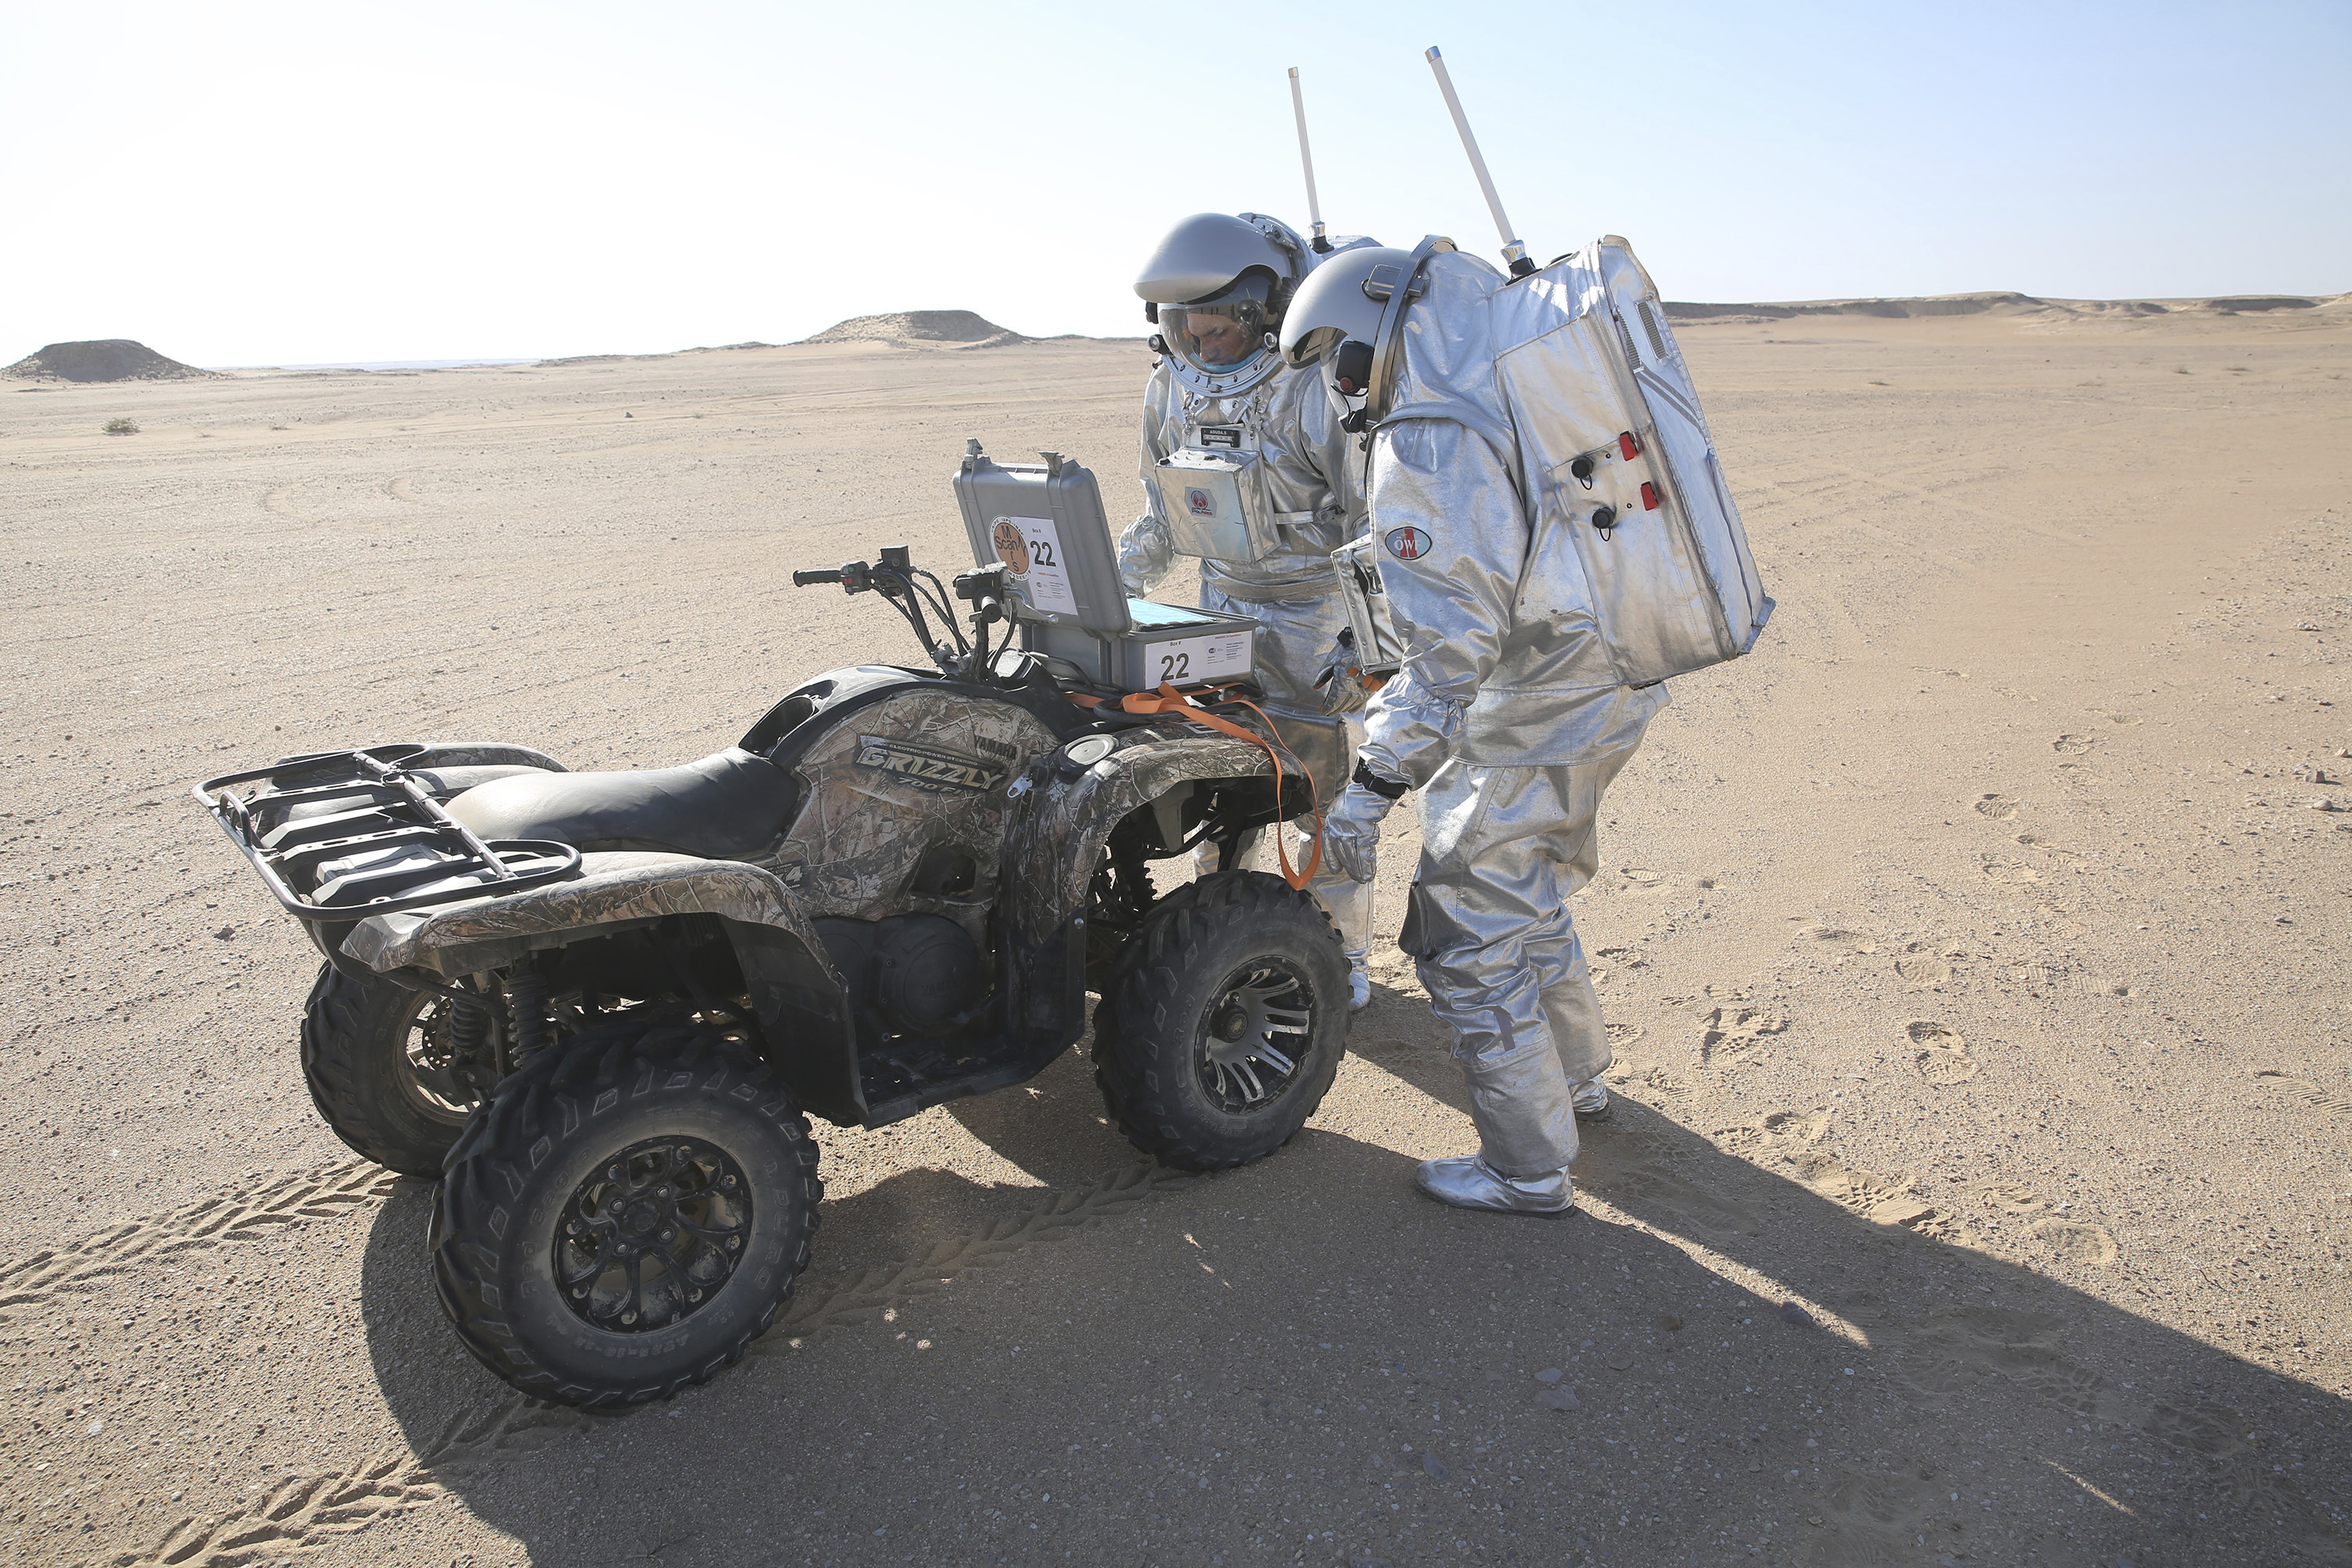 Two scientists test space suits and a geo-radar for use in a future Mars mission in the Dhofar desert of southern Oman (Sam McNeil/PA)